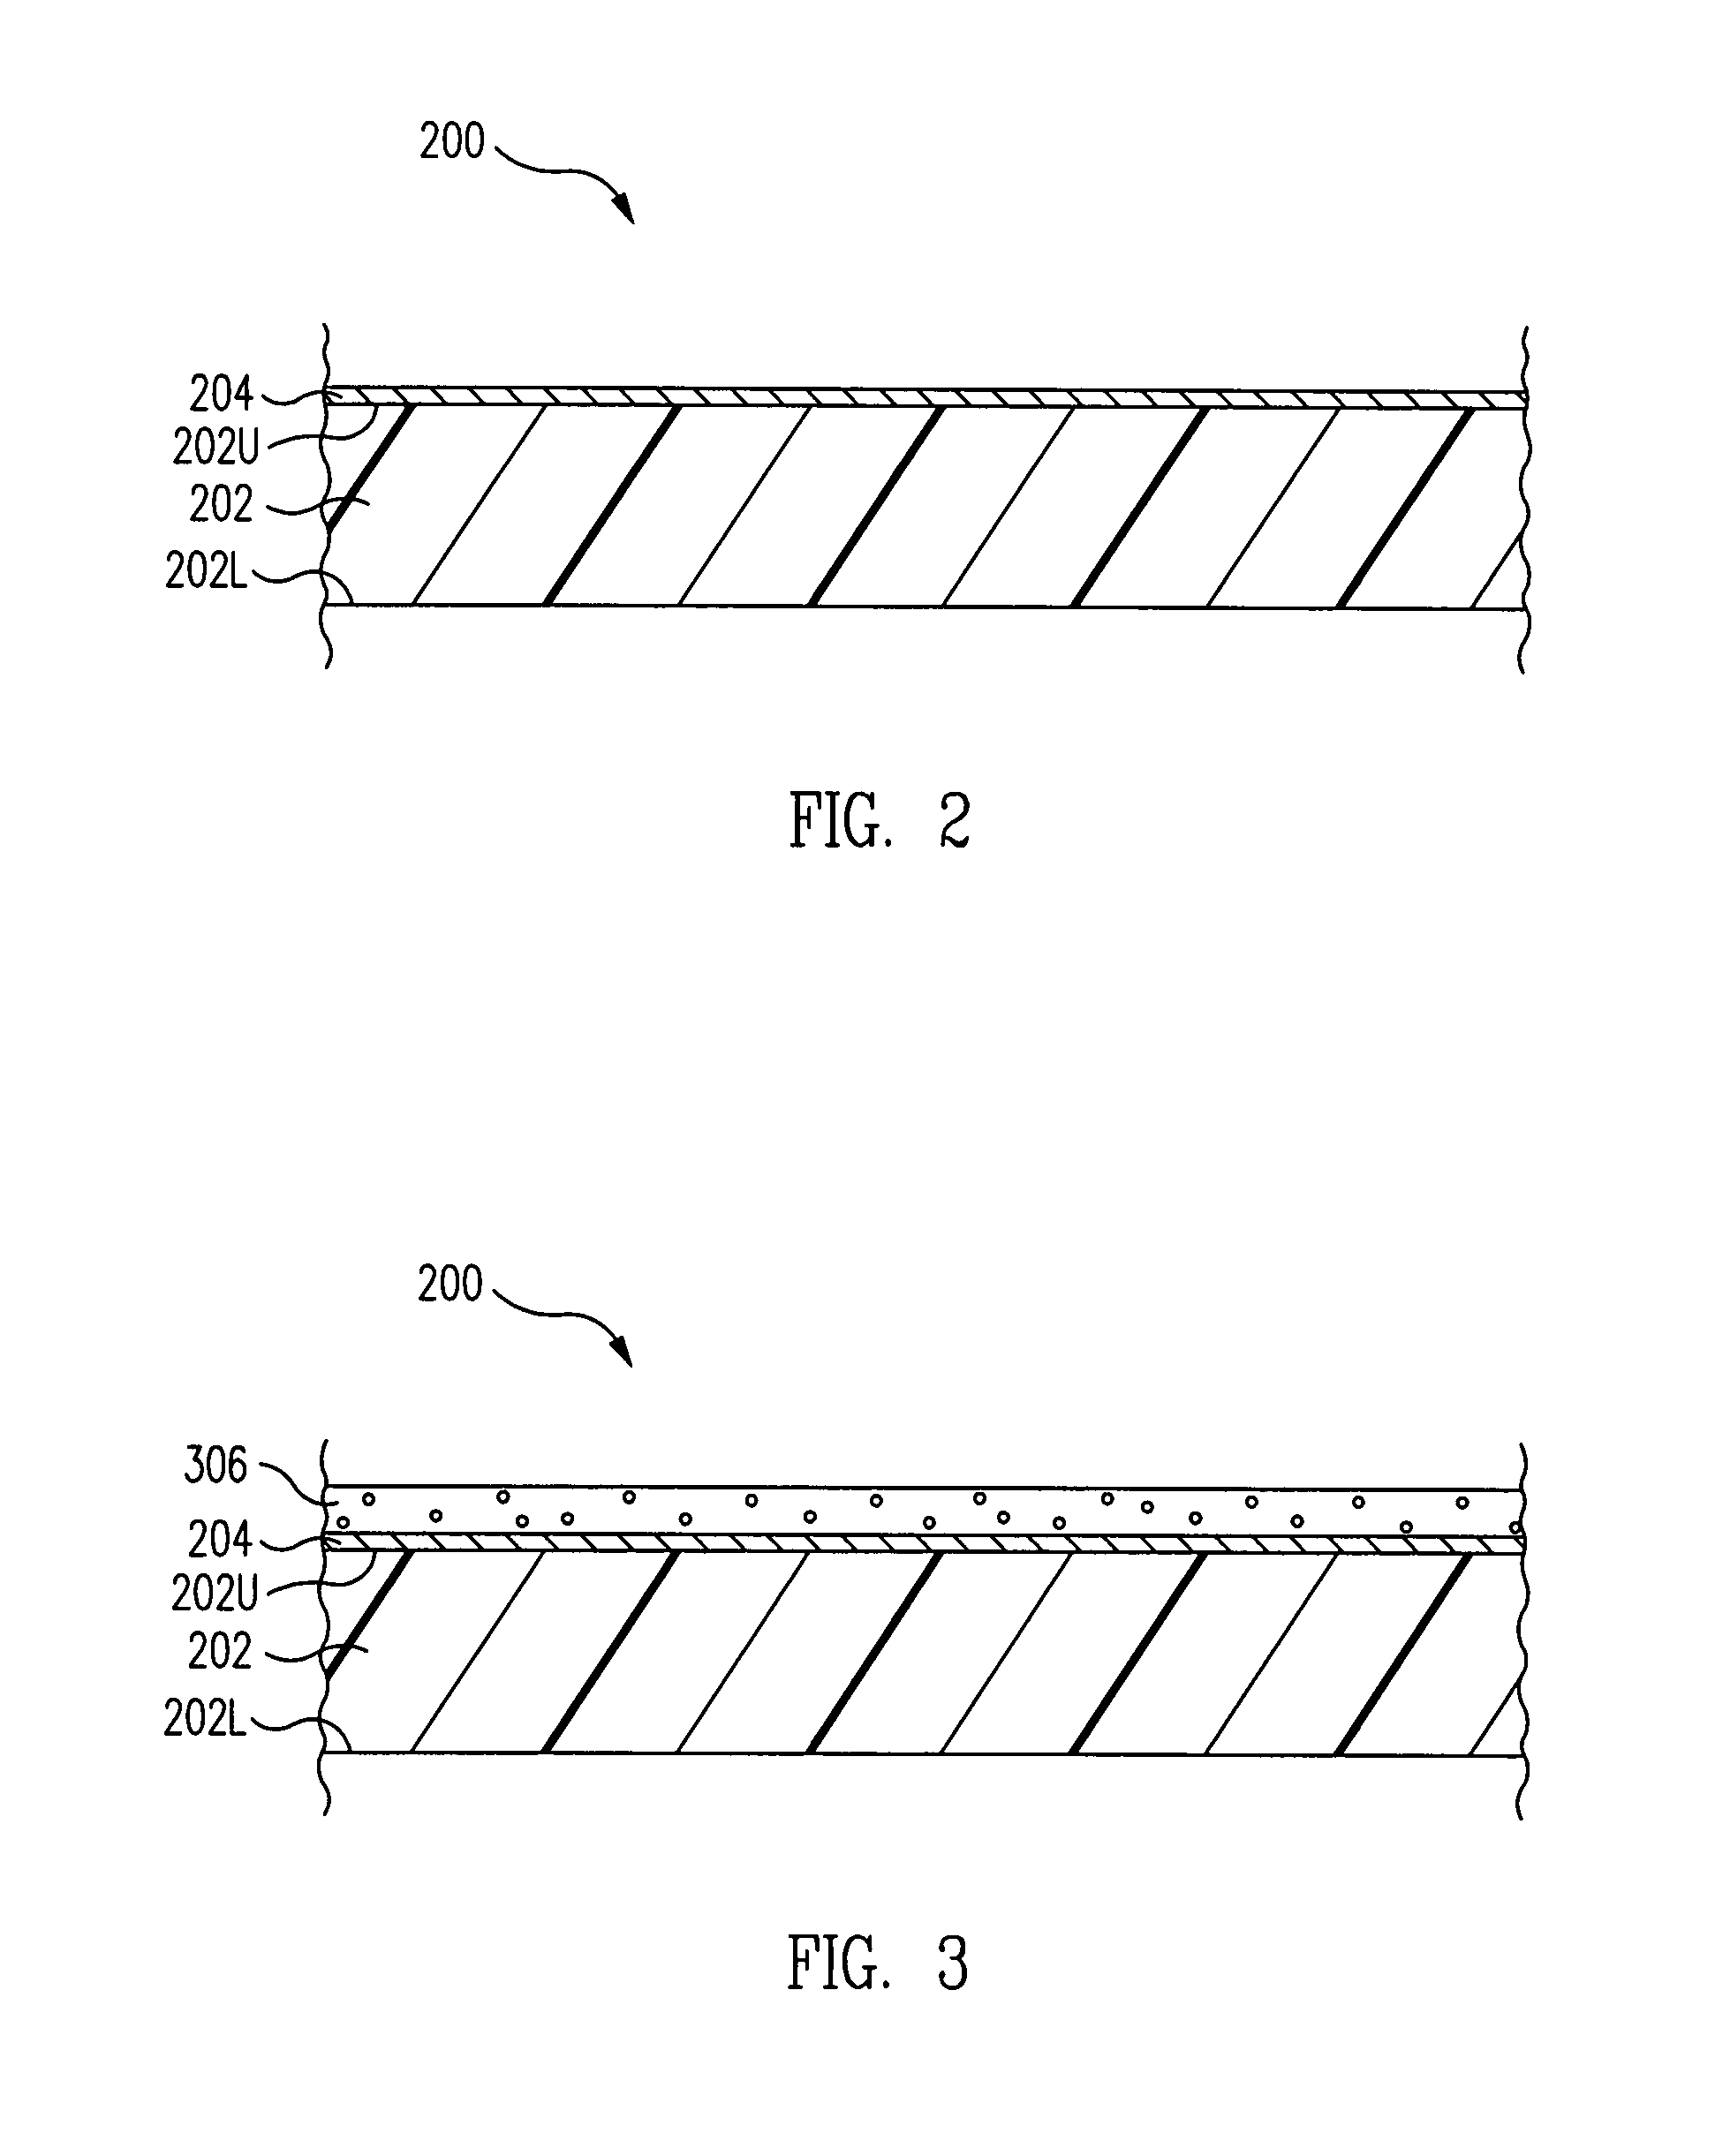 Method of fabricating an embedded circuit pattern